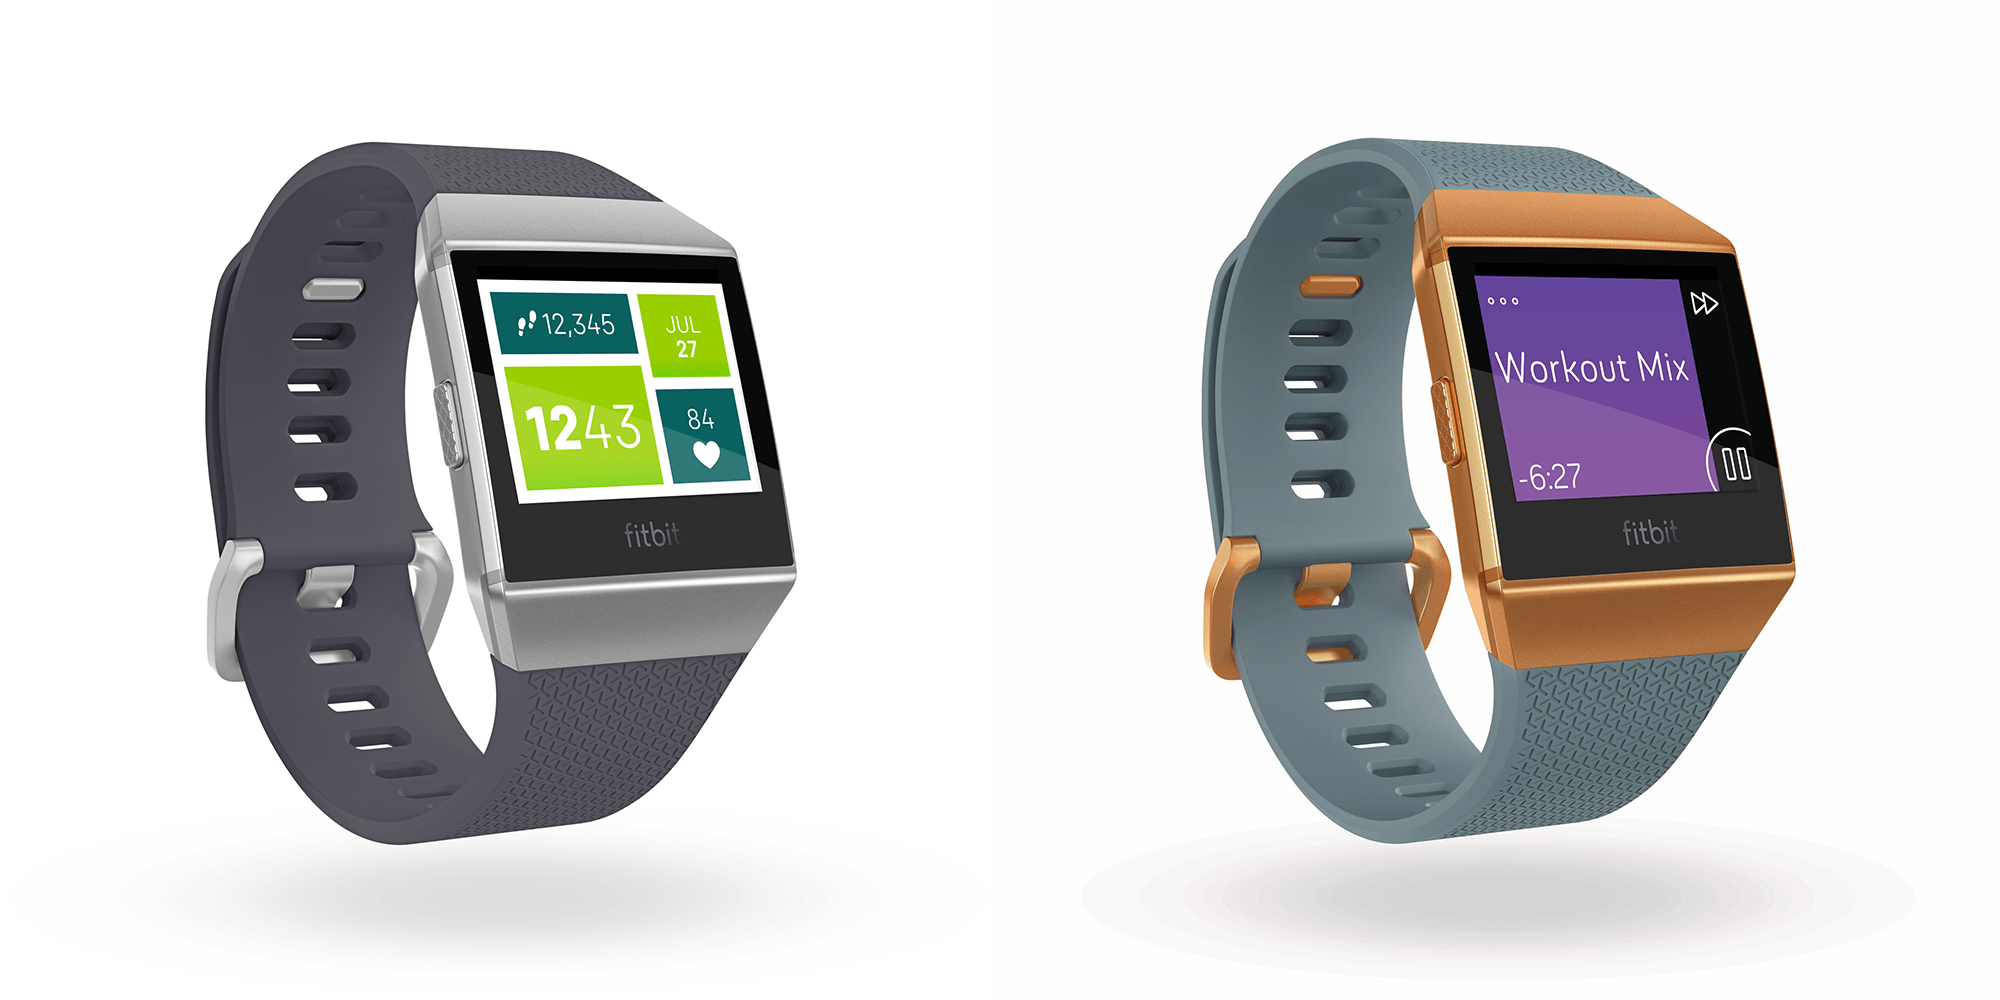 Fitbit announces its first smartwatch, the Iconic, along with new